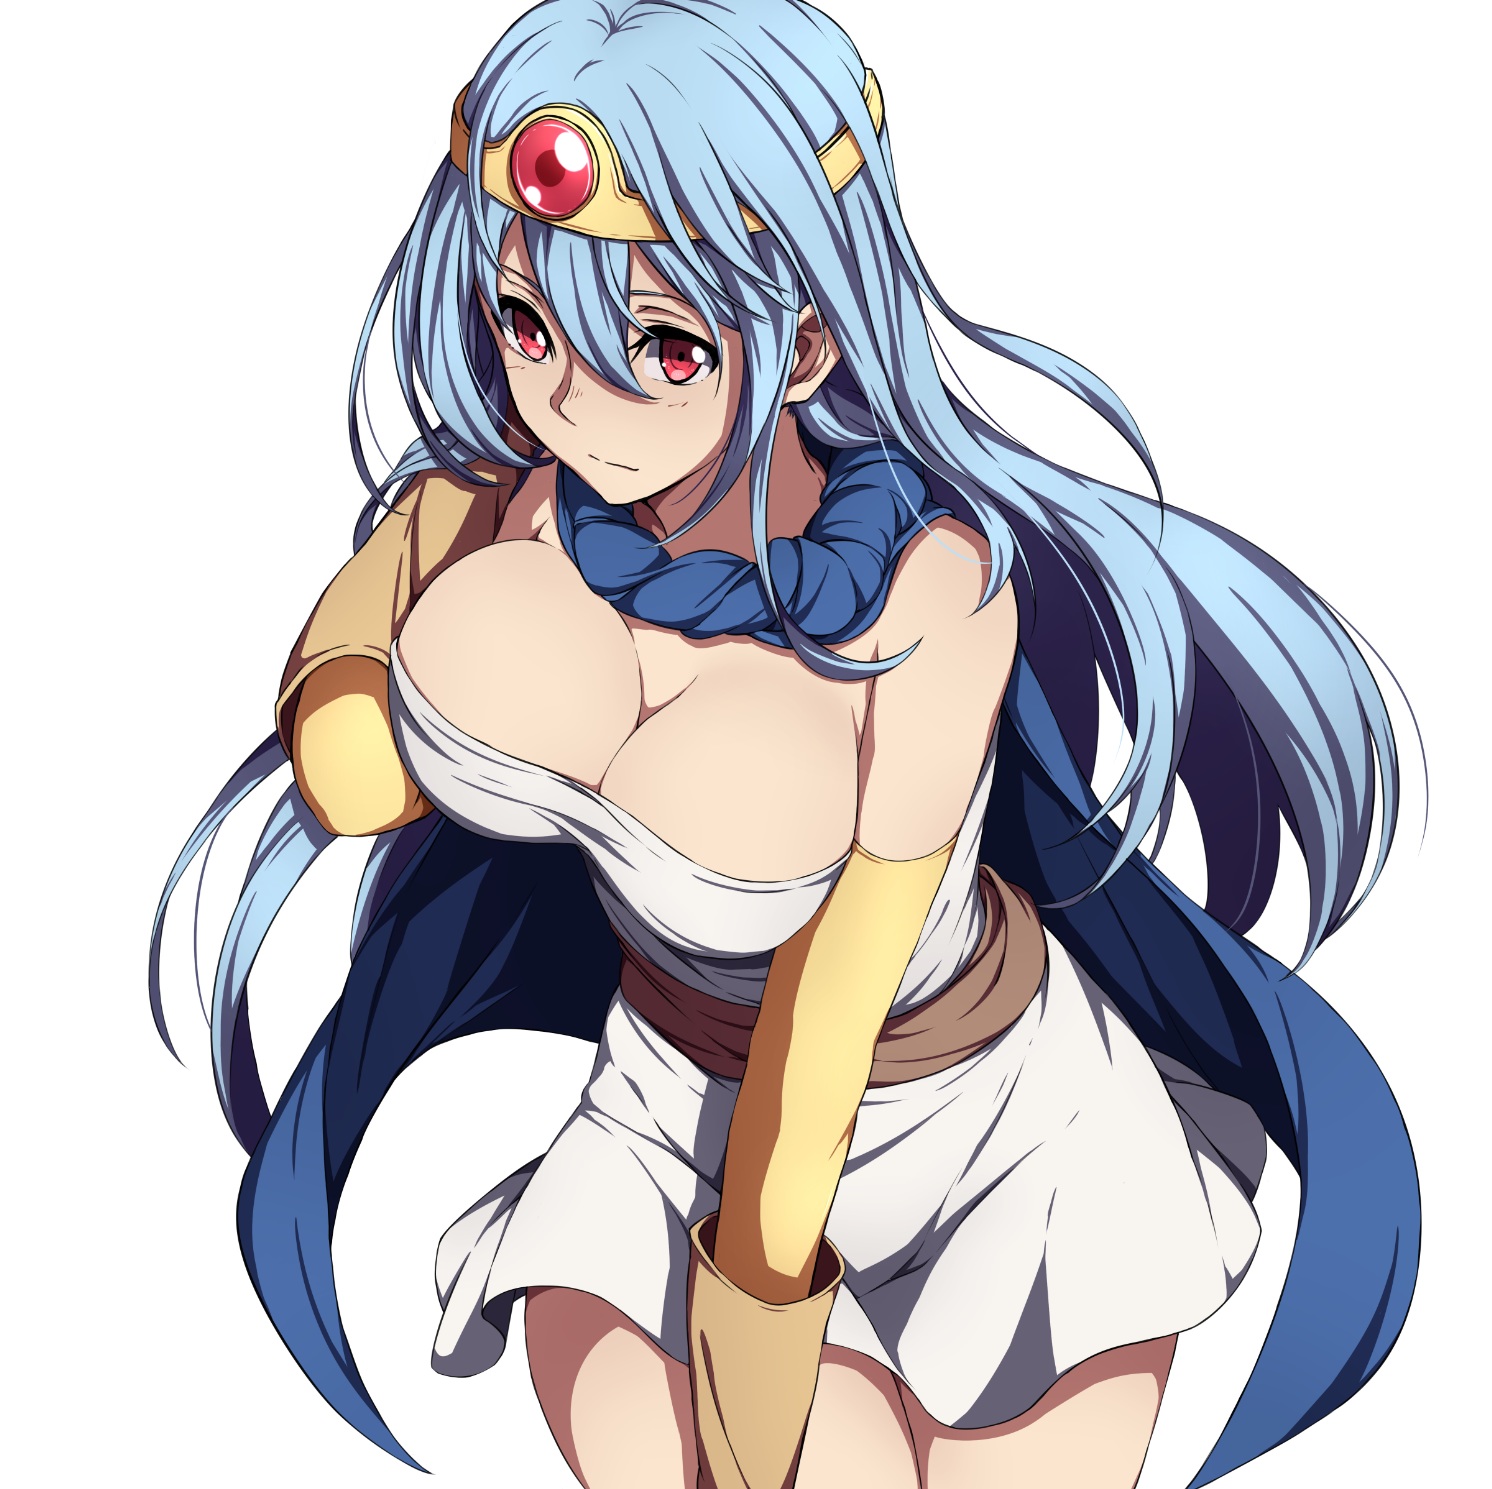 Anime 1492x1489 Dragon Quest Sblack blue hair cleavage white background